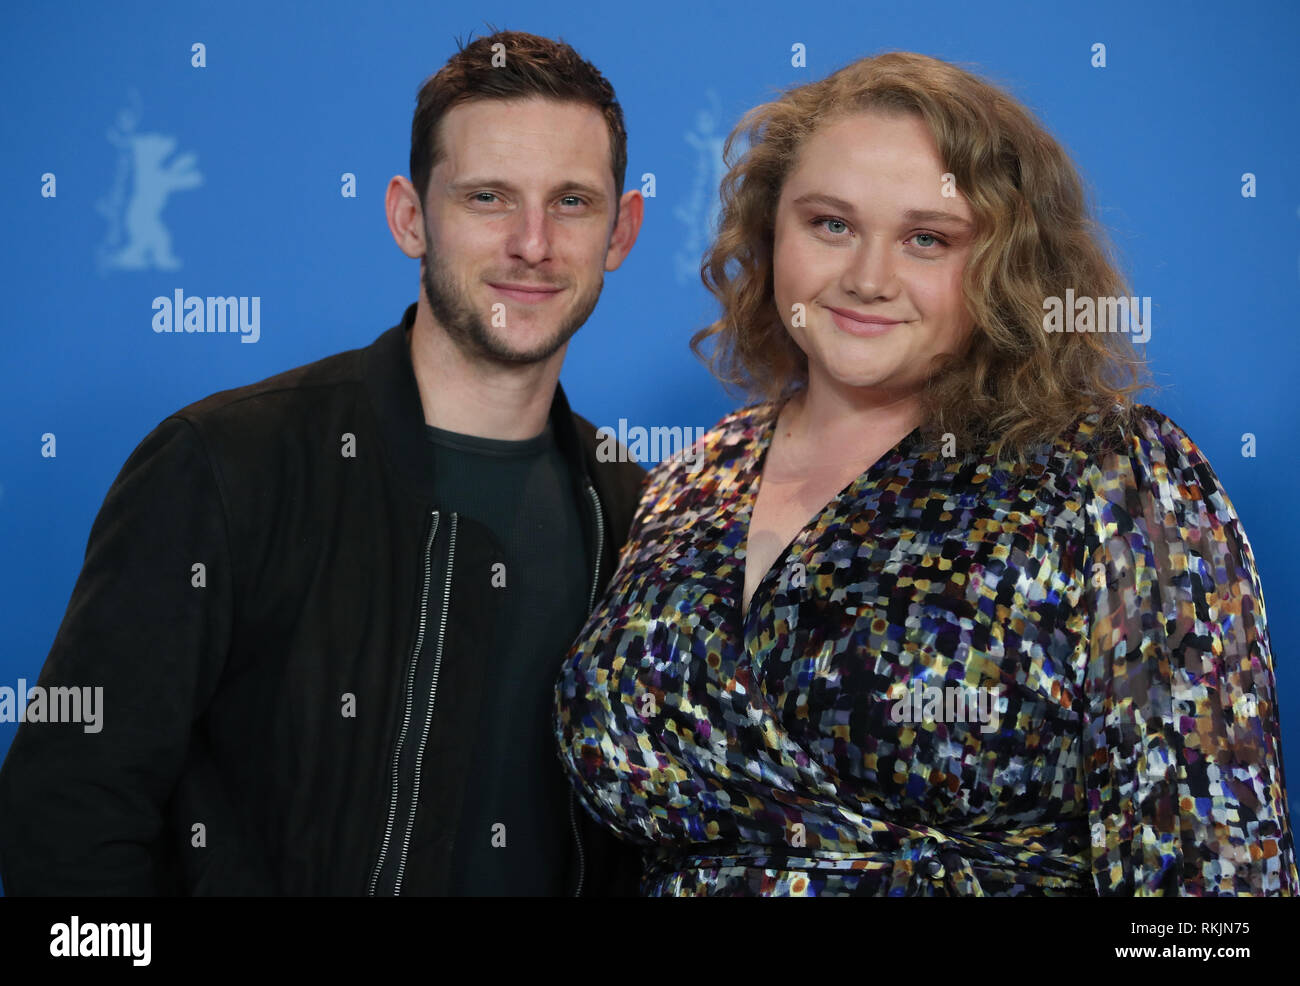 Berlin, Germany. 11th Feb, 2019. 69th Berlinale, Photocall 'Skin', USA, Panorama: Jamie Bell, British actor stands next to Danielle Macdonald, actress. Credit: Christof Soeder/dpa/Alamy Live News Stock Photo